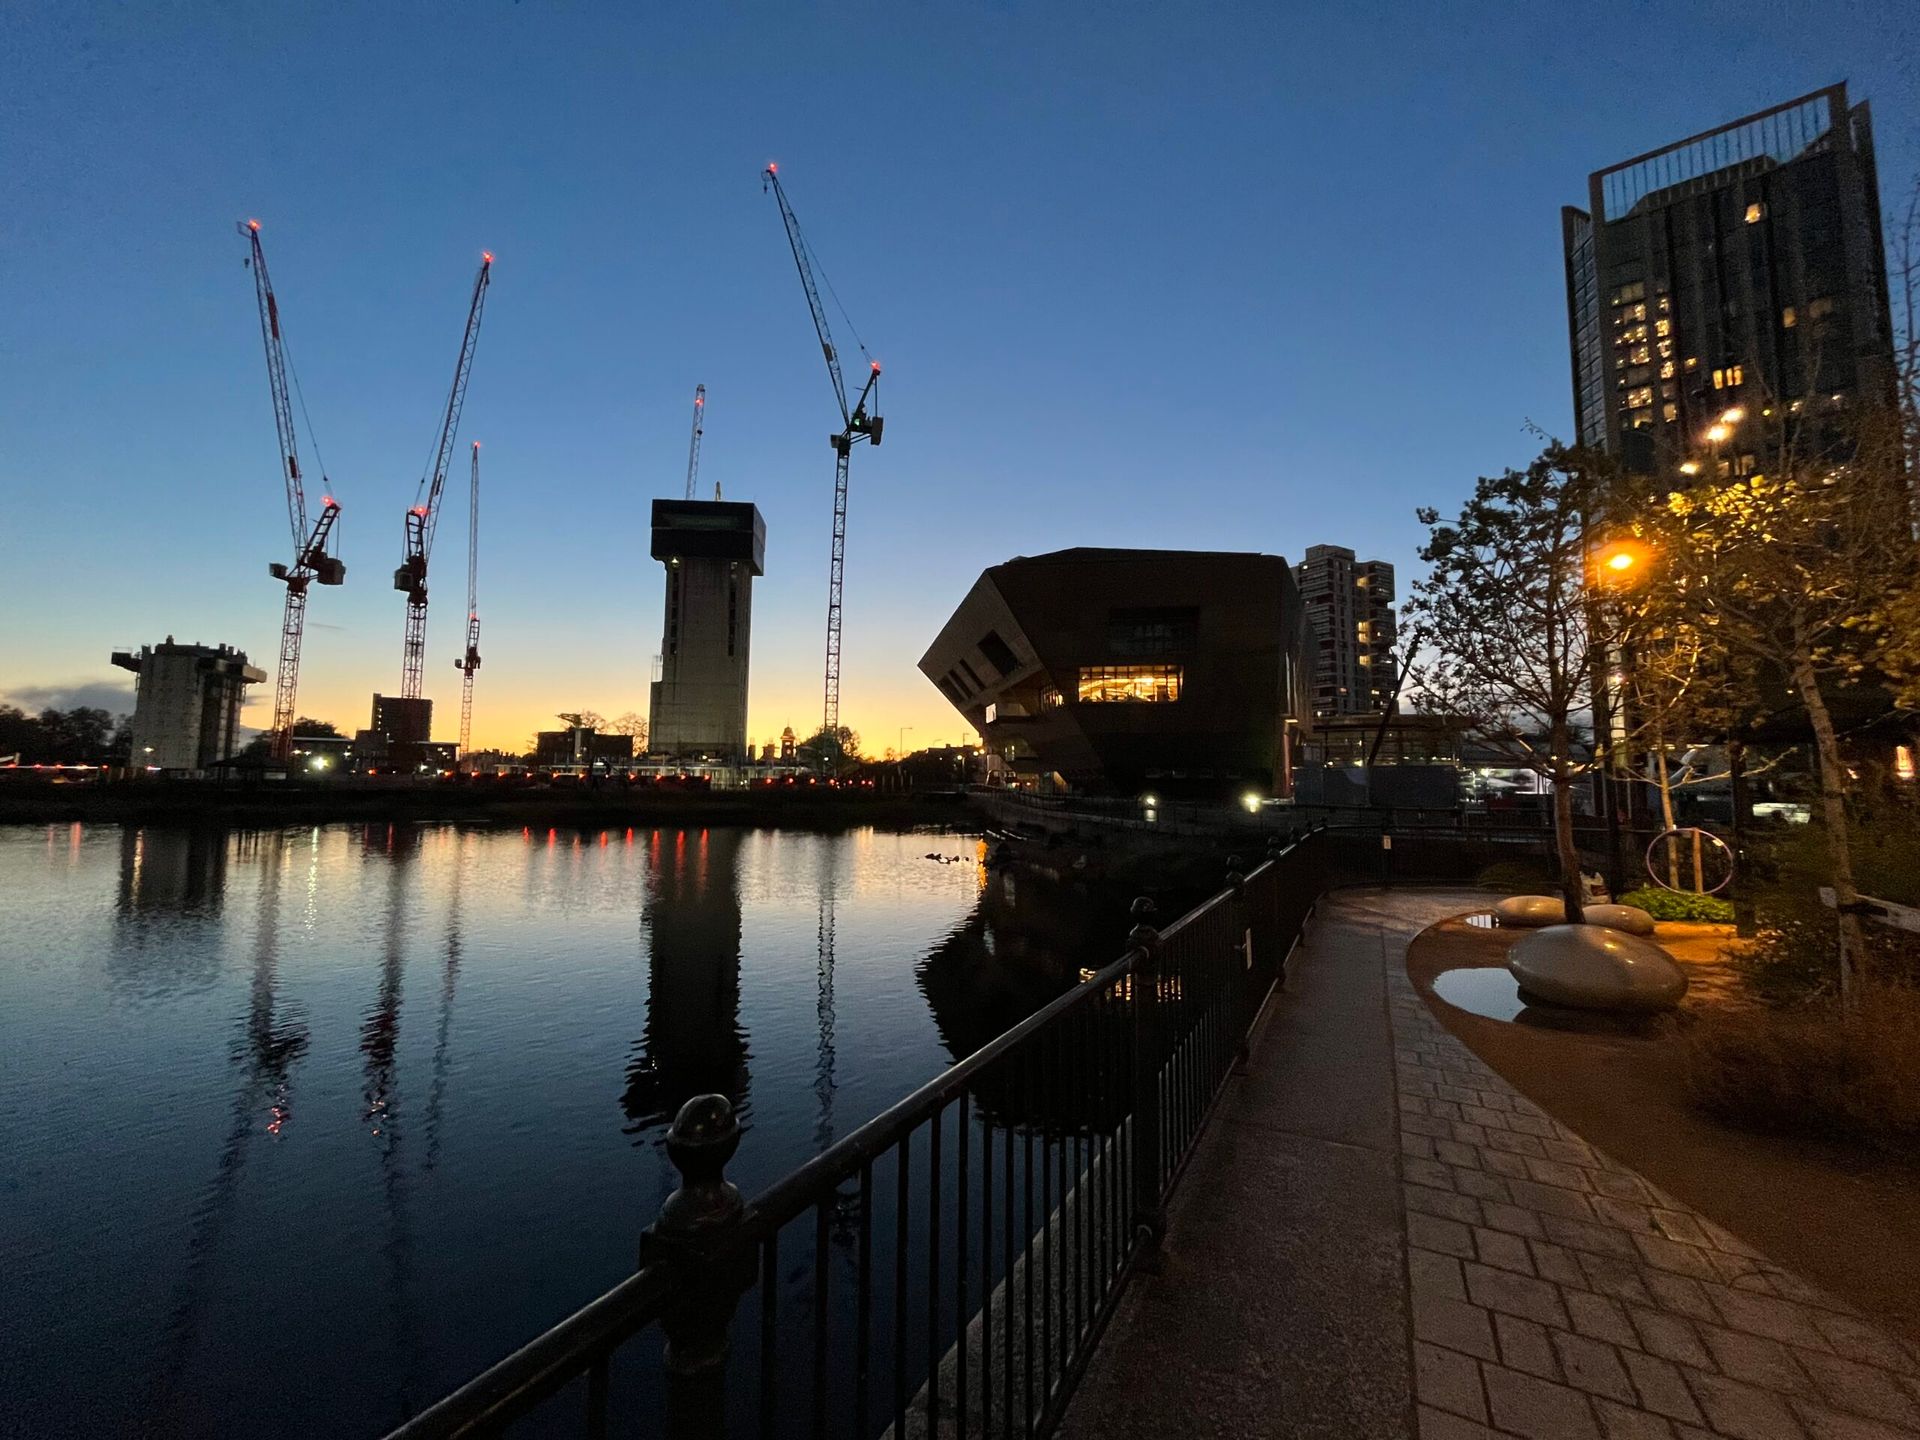 City sunset 🌆over a lake with an hexagonalo/angular/polygon shaped building next to it that looks like the Star Wars sand crawler vehicle for the Houdinis